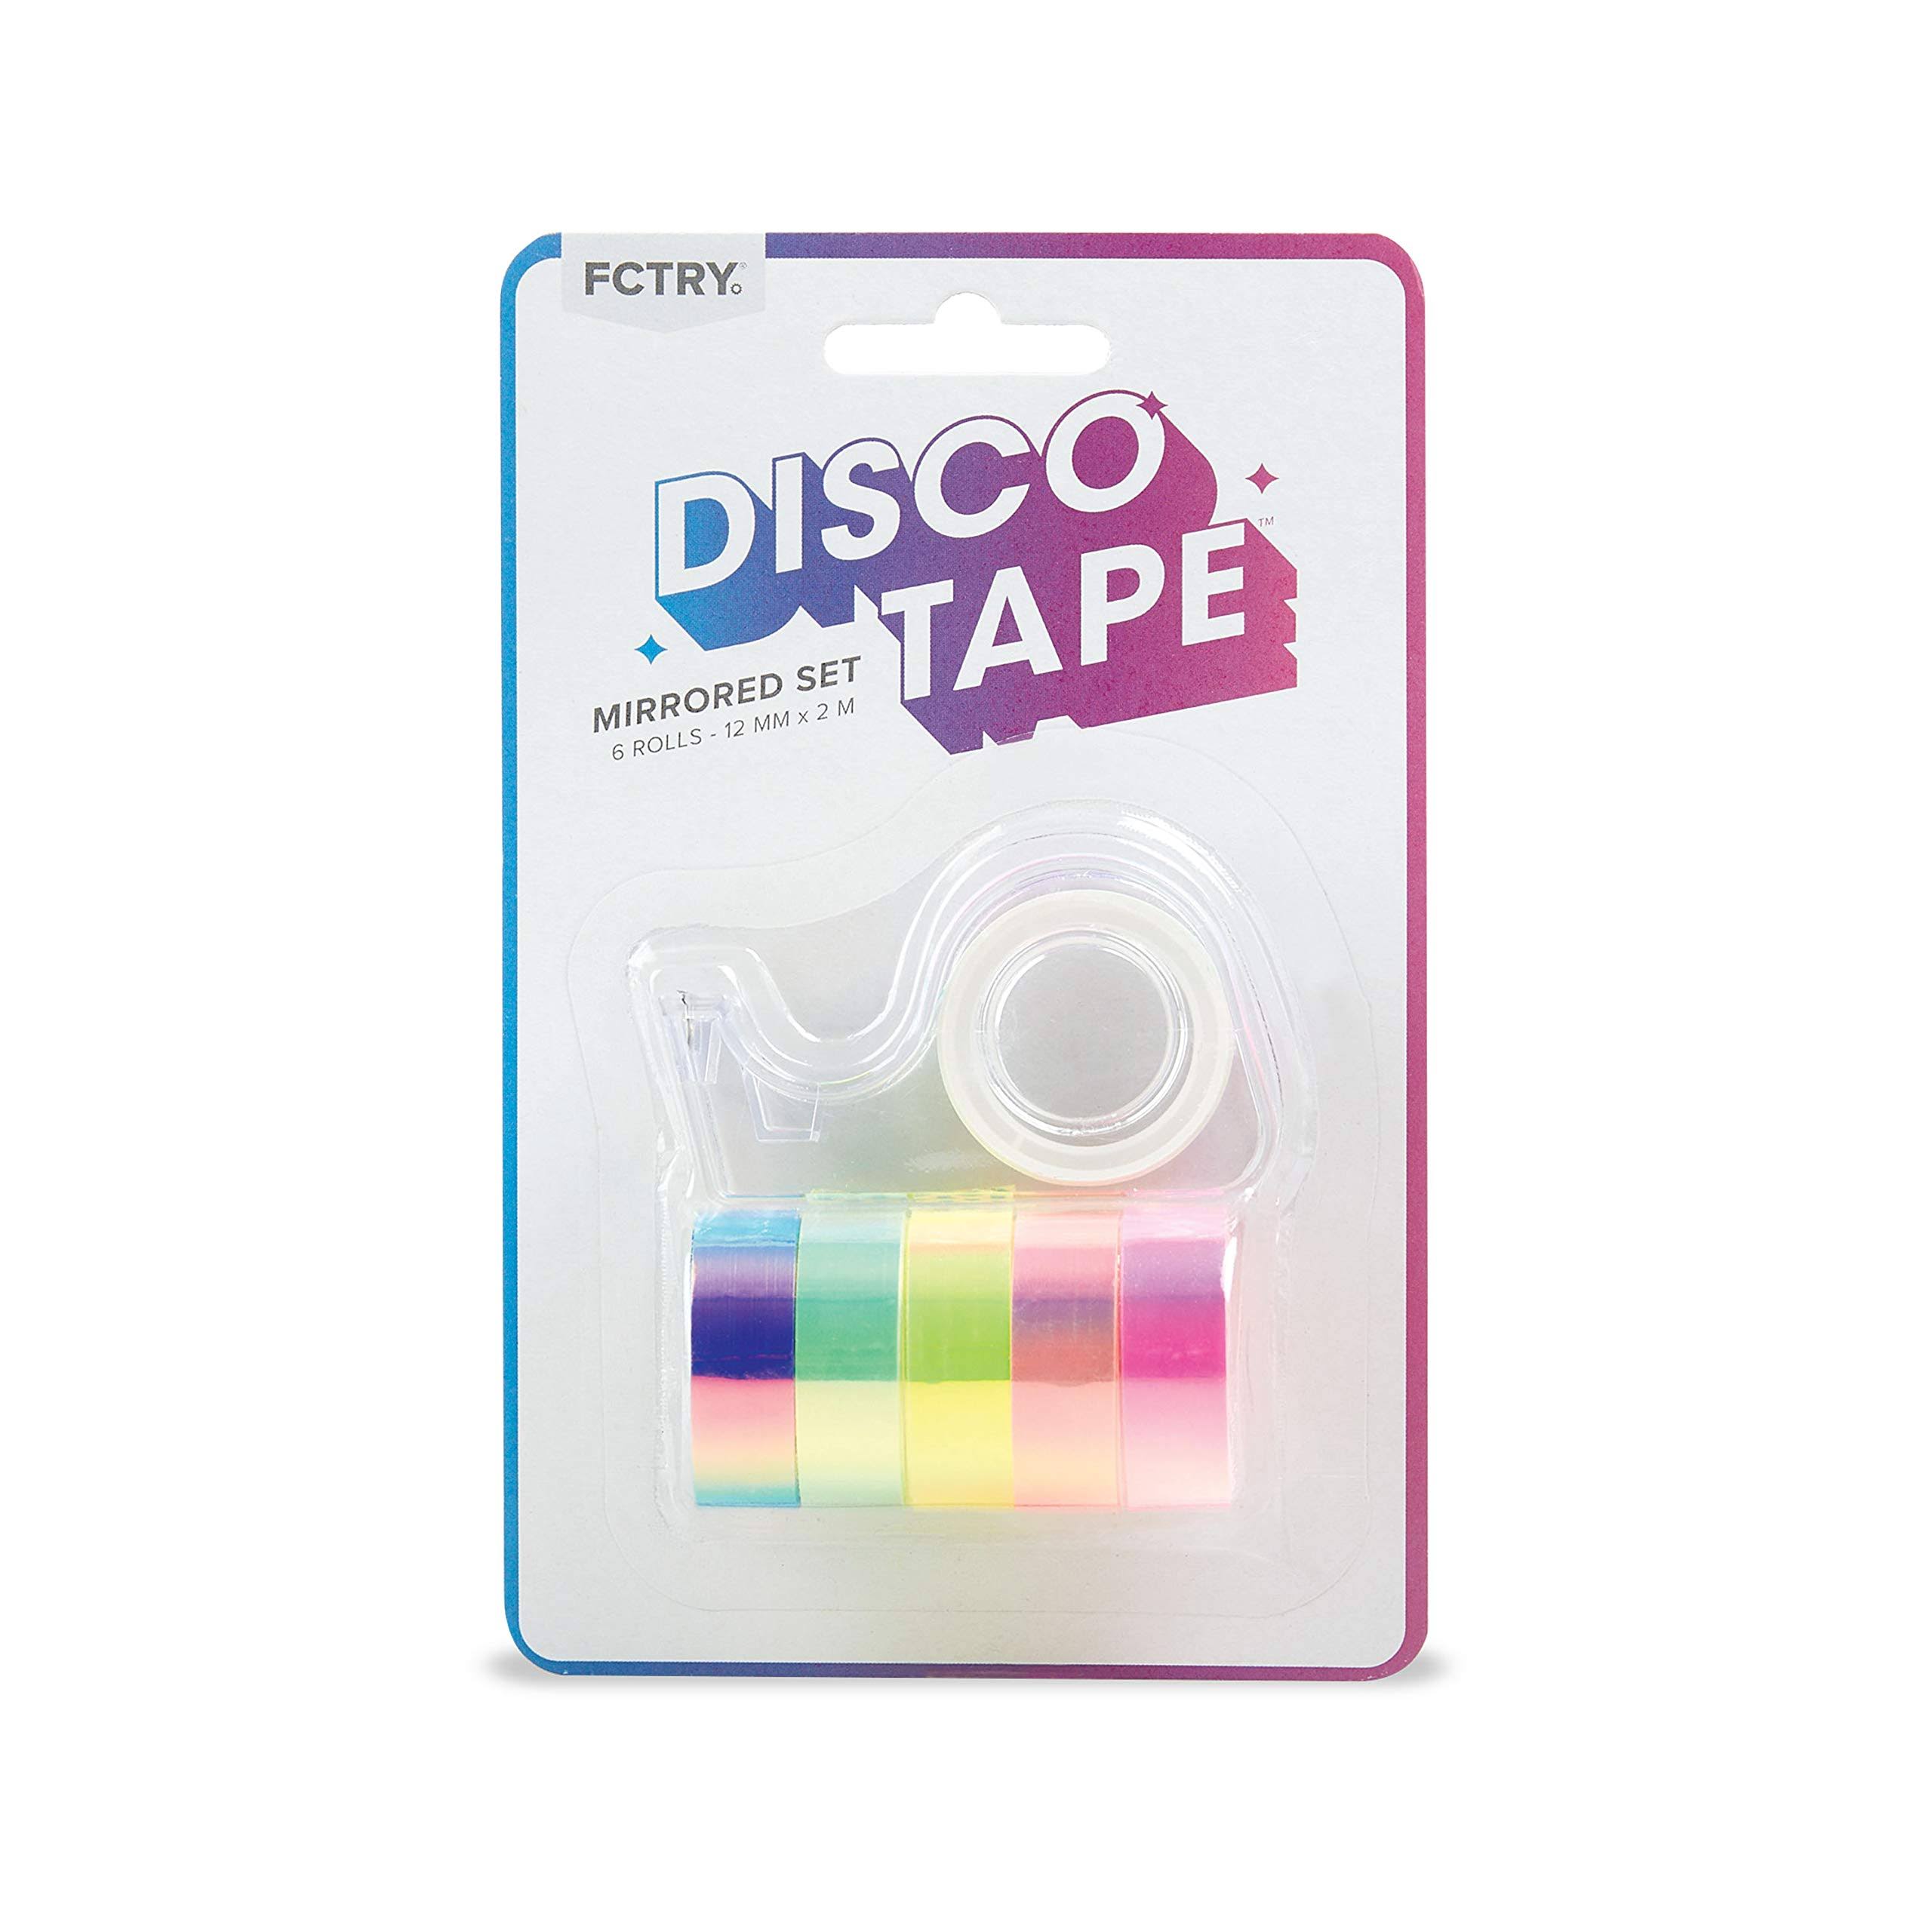 FCTRY Disco Tape for Packing or Crafting, Set of 1